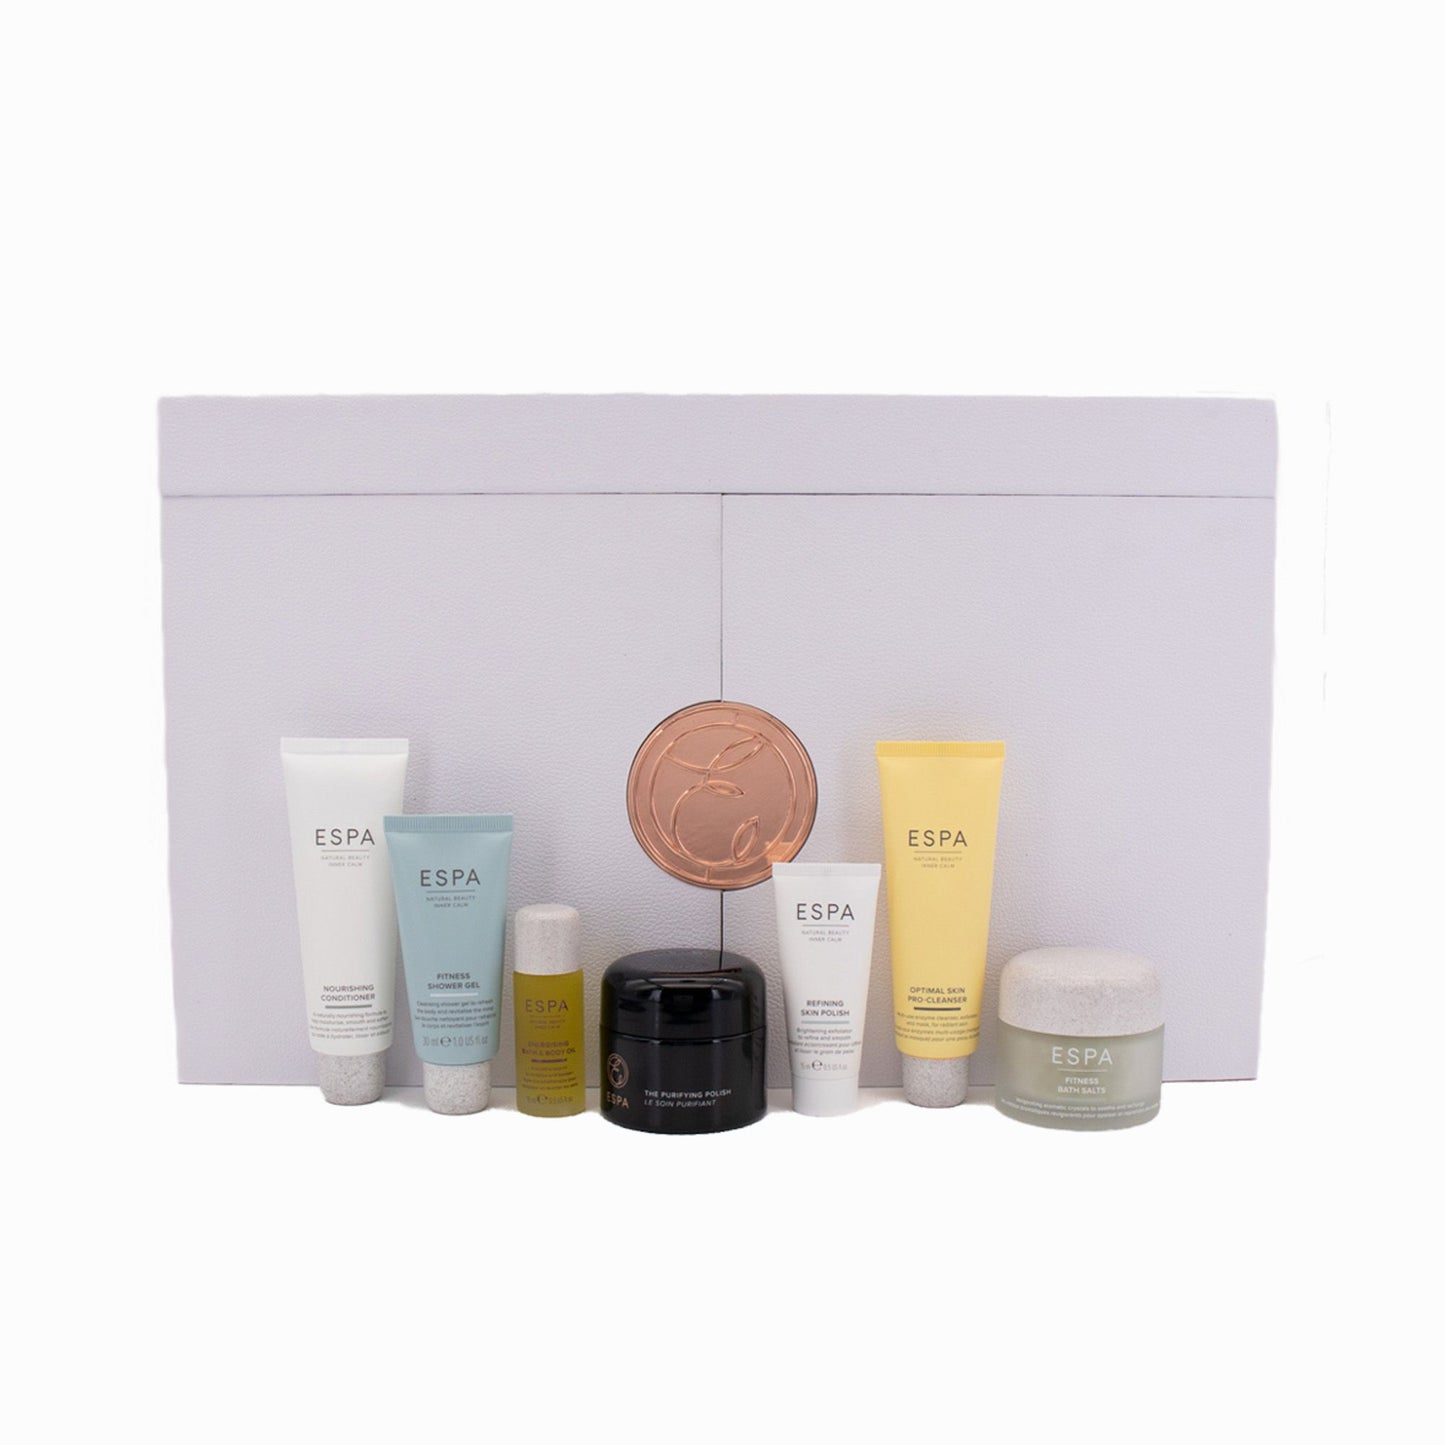 Espa Wellbeing Day to Night Wellness 25 Day Advent Calander - Imperfect Box